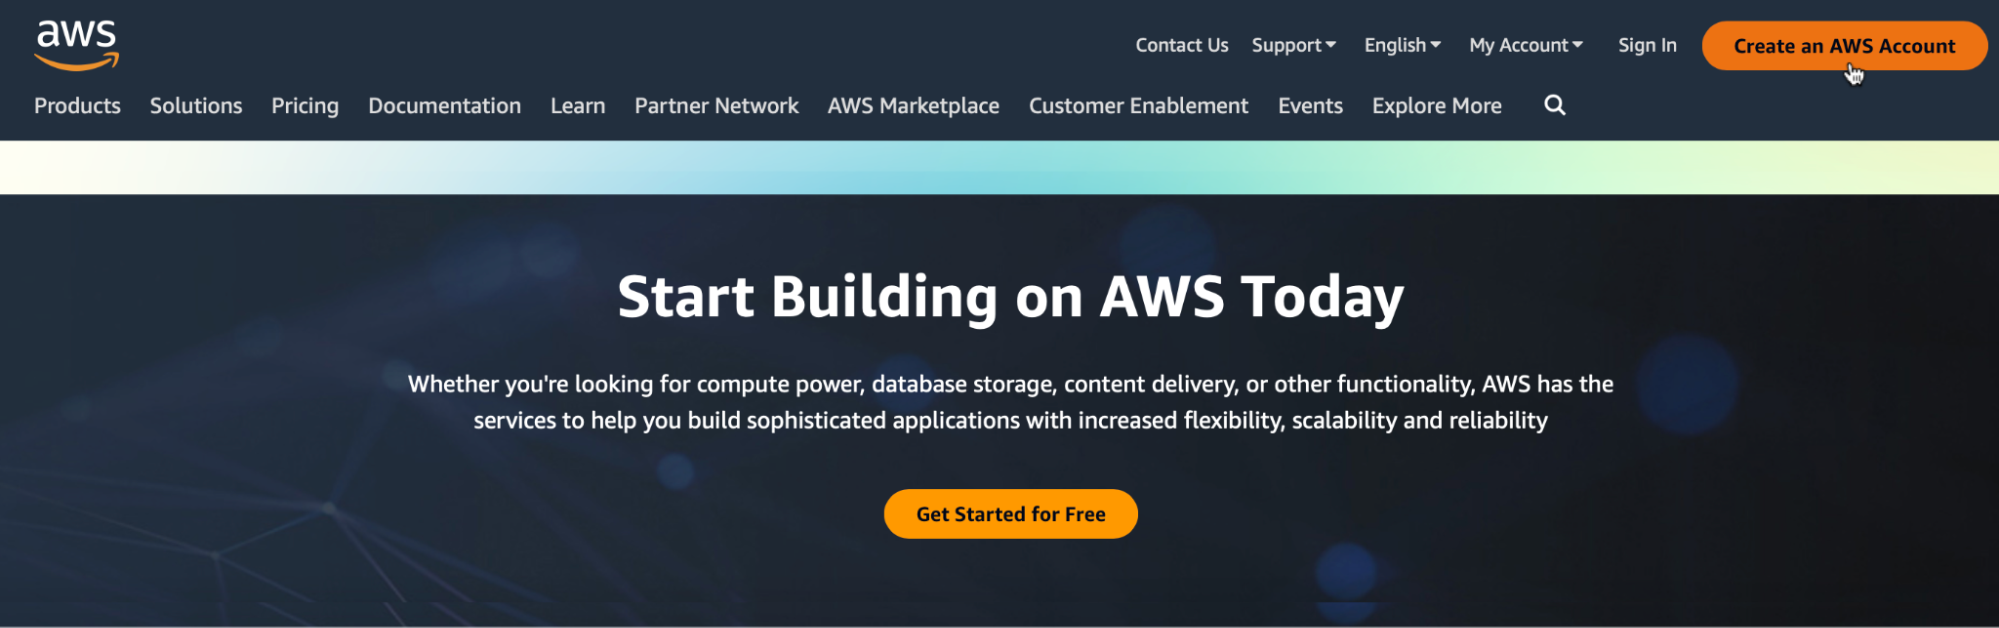 5 start building on aws today